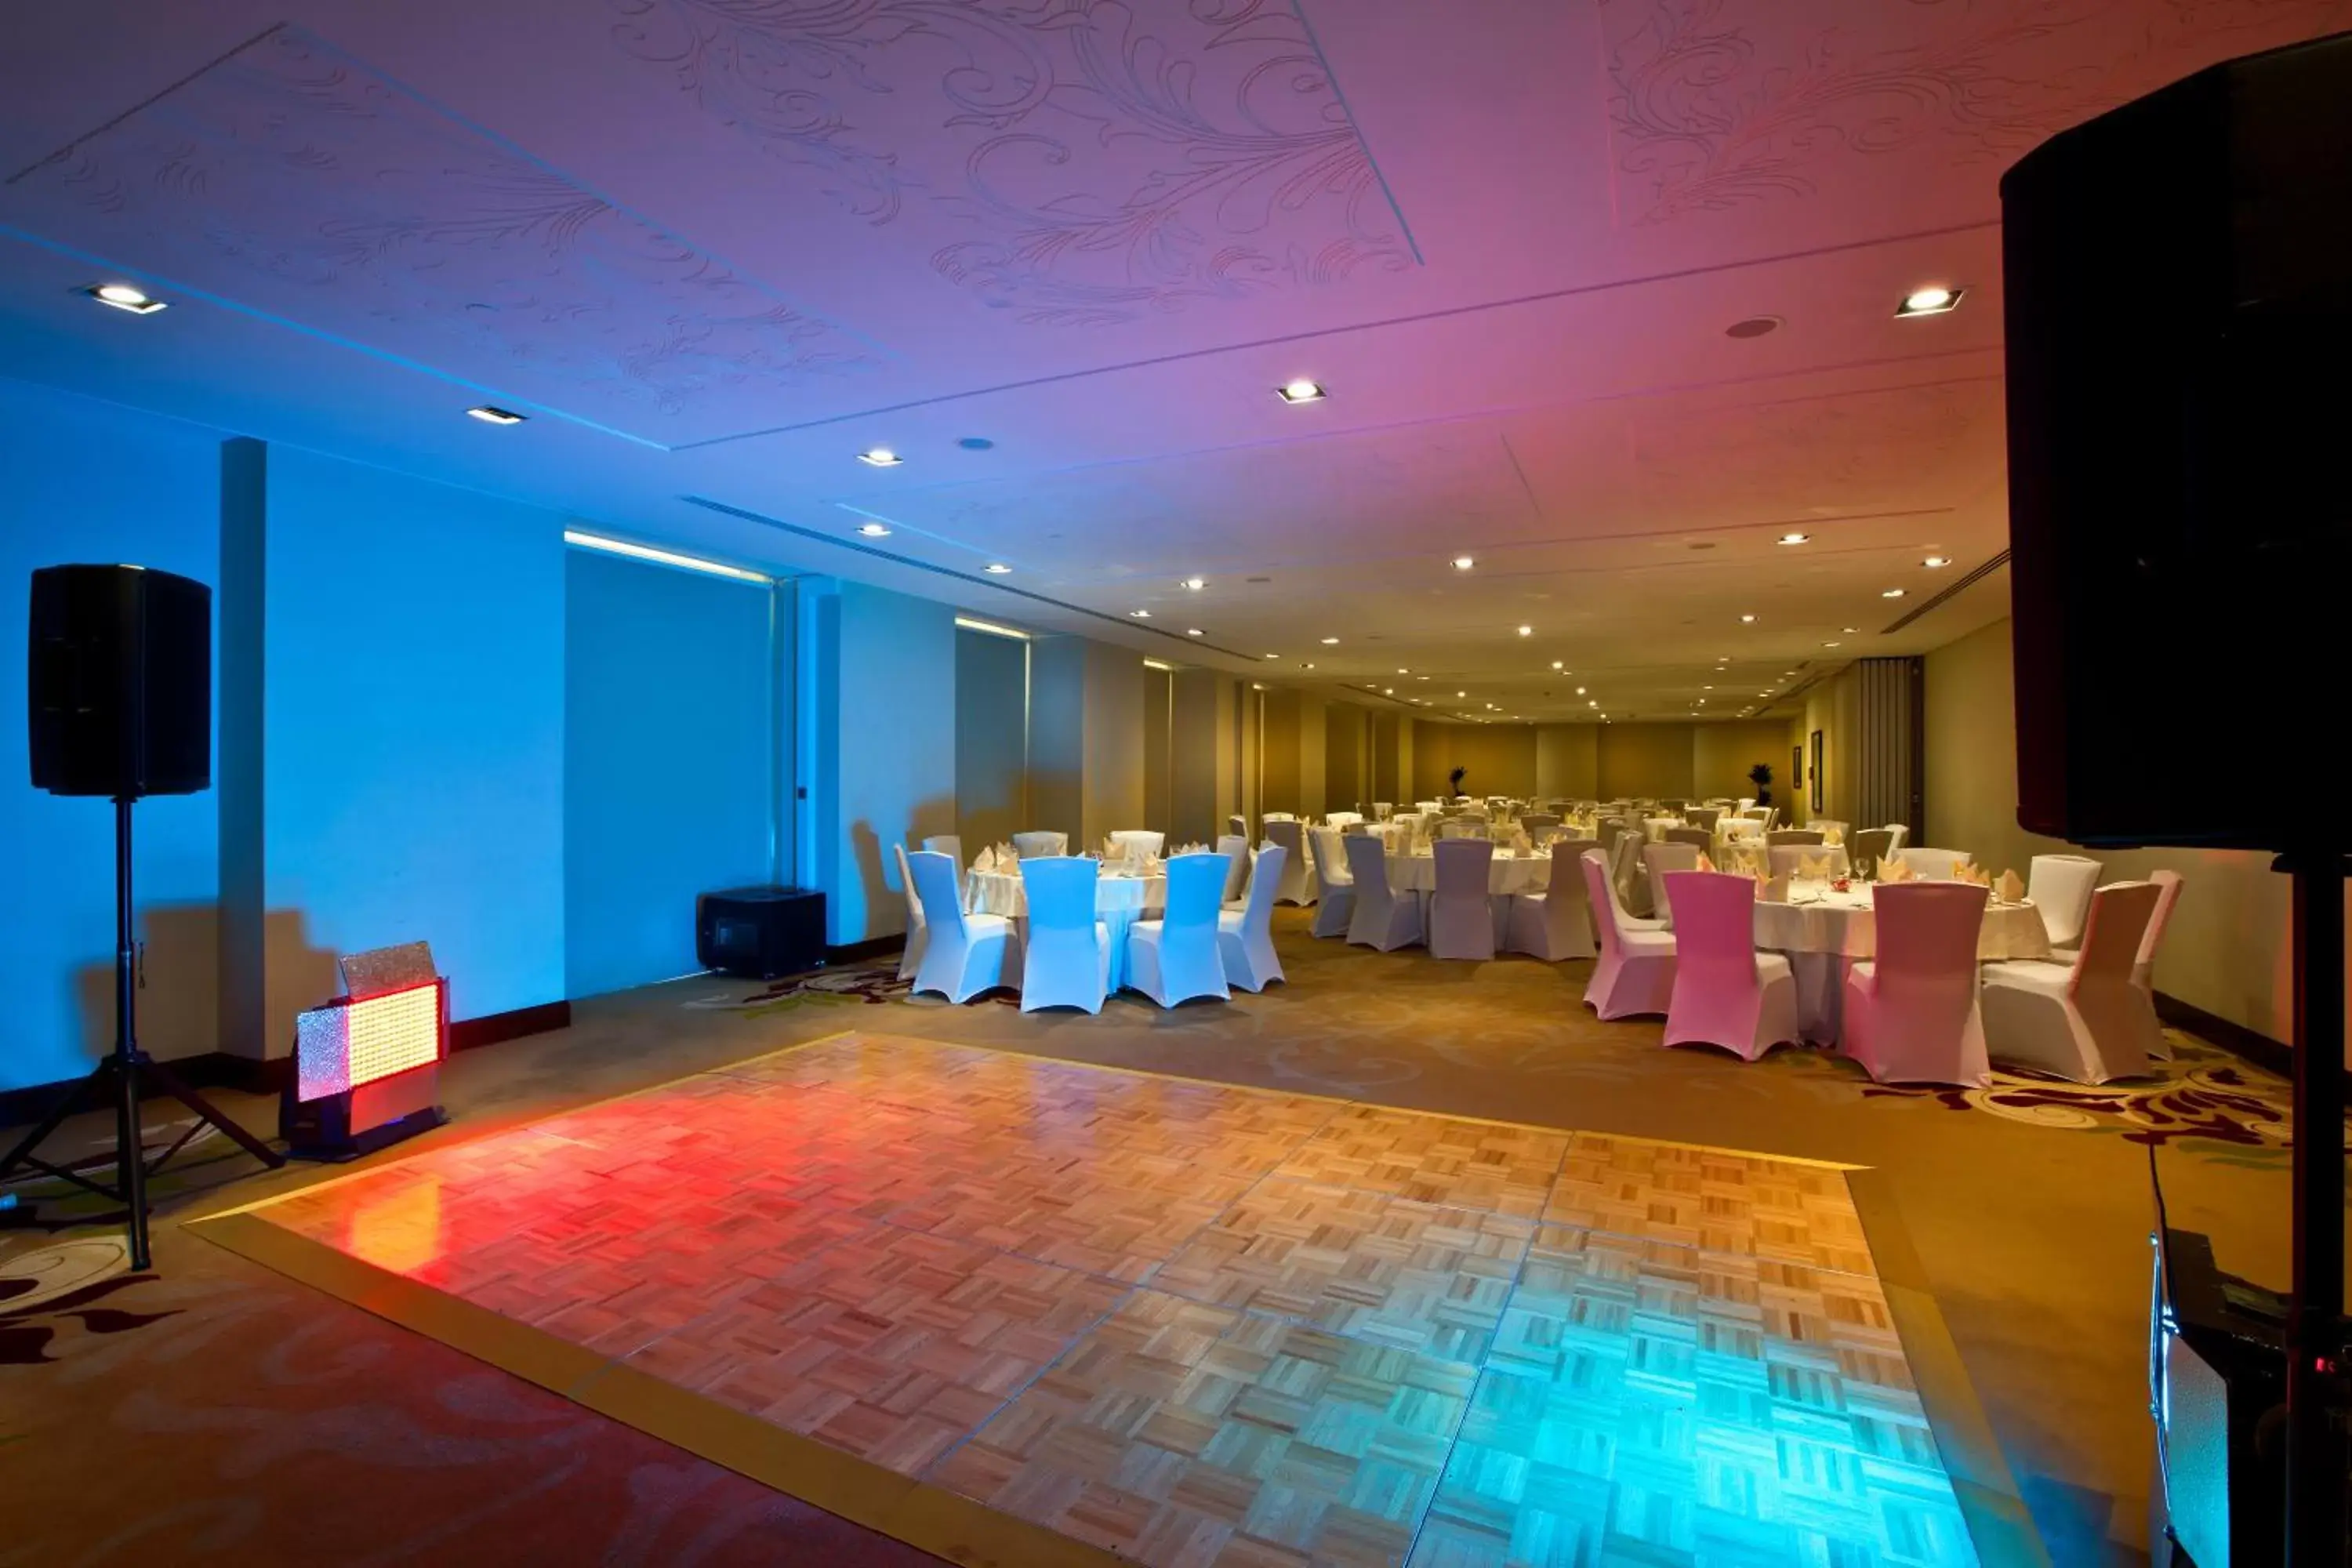 Banquet/Function facilities, Banquet Facilities in The Tower Plaza Hotel Dubai